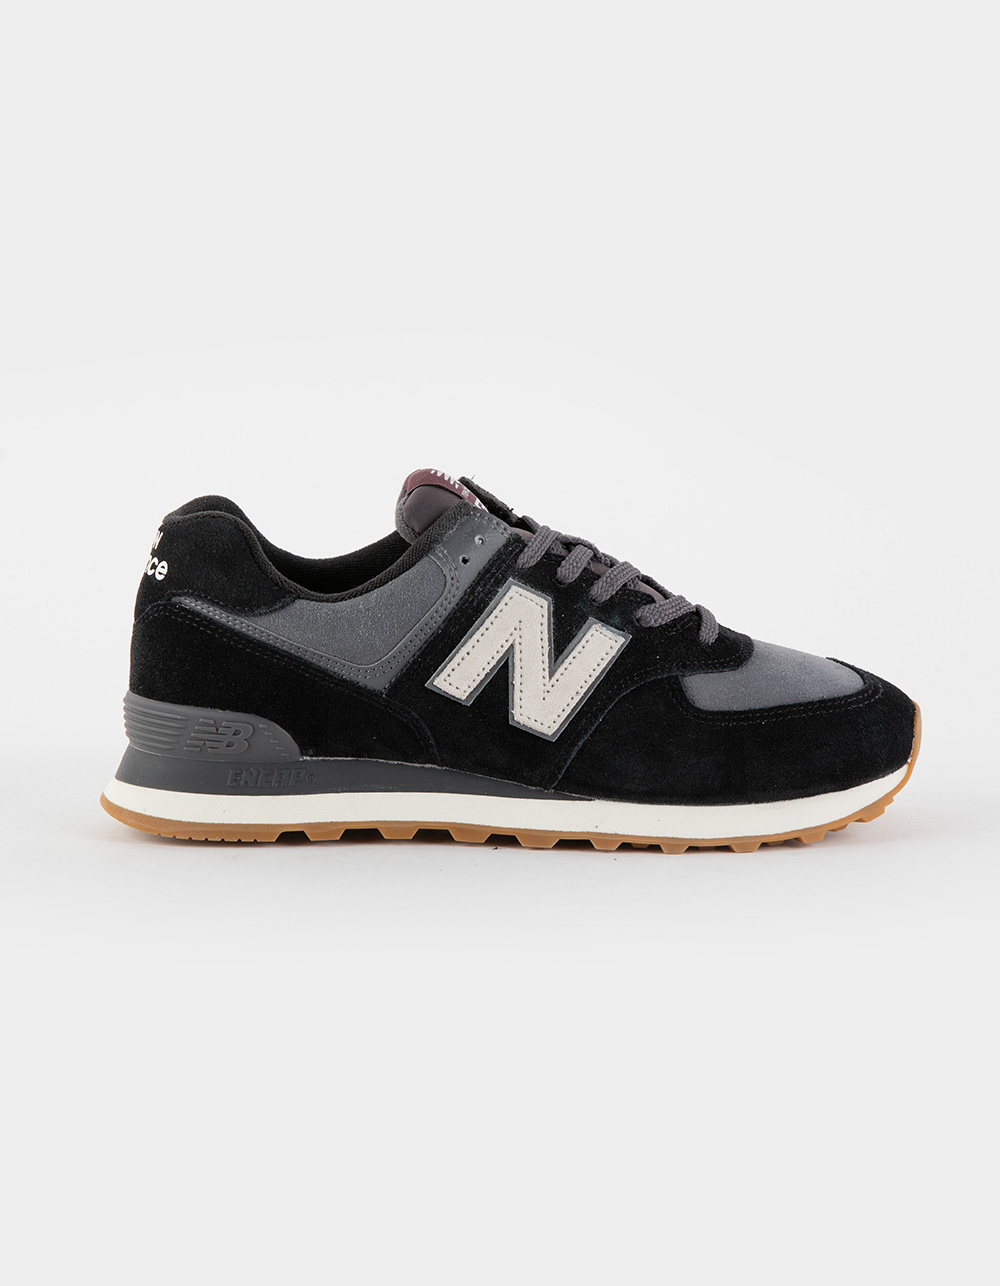 NEW BALANCE 574 Shoes - BLK/GRY | Tillys